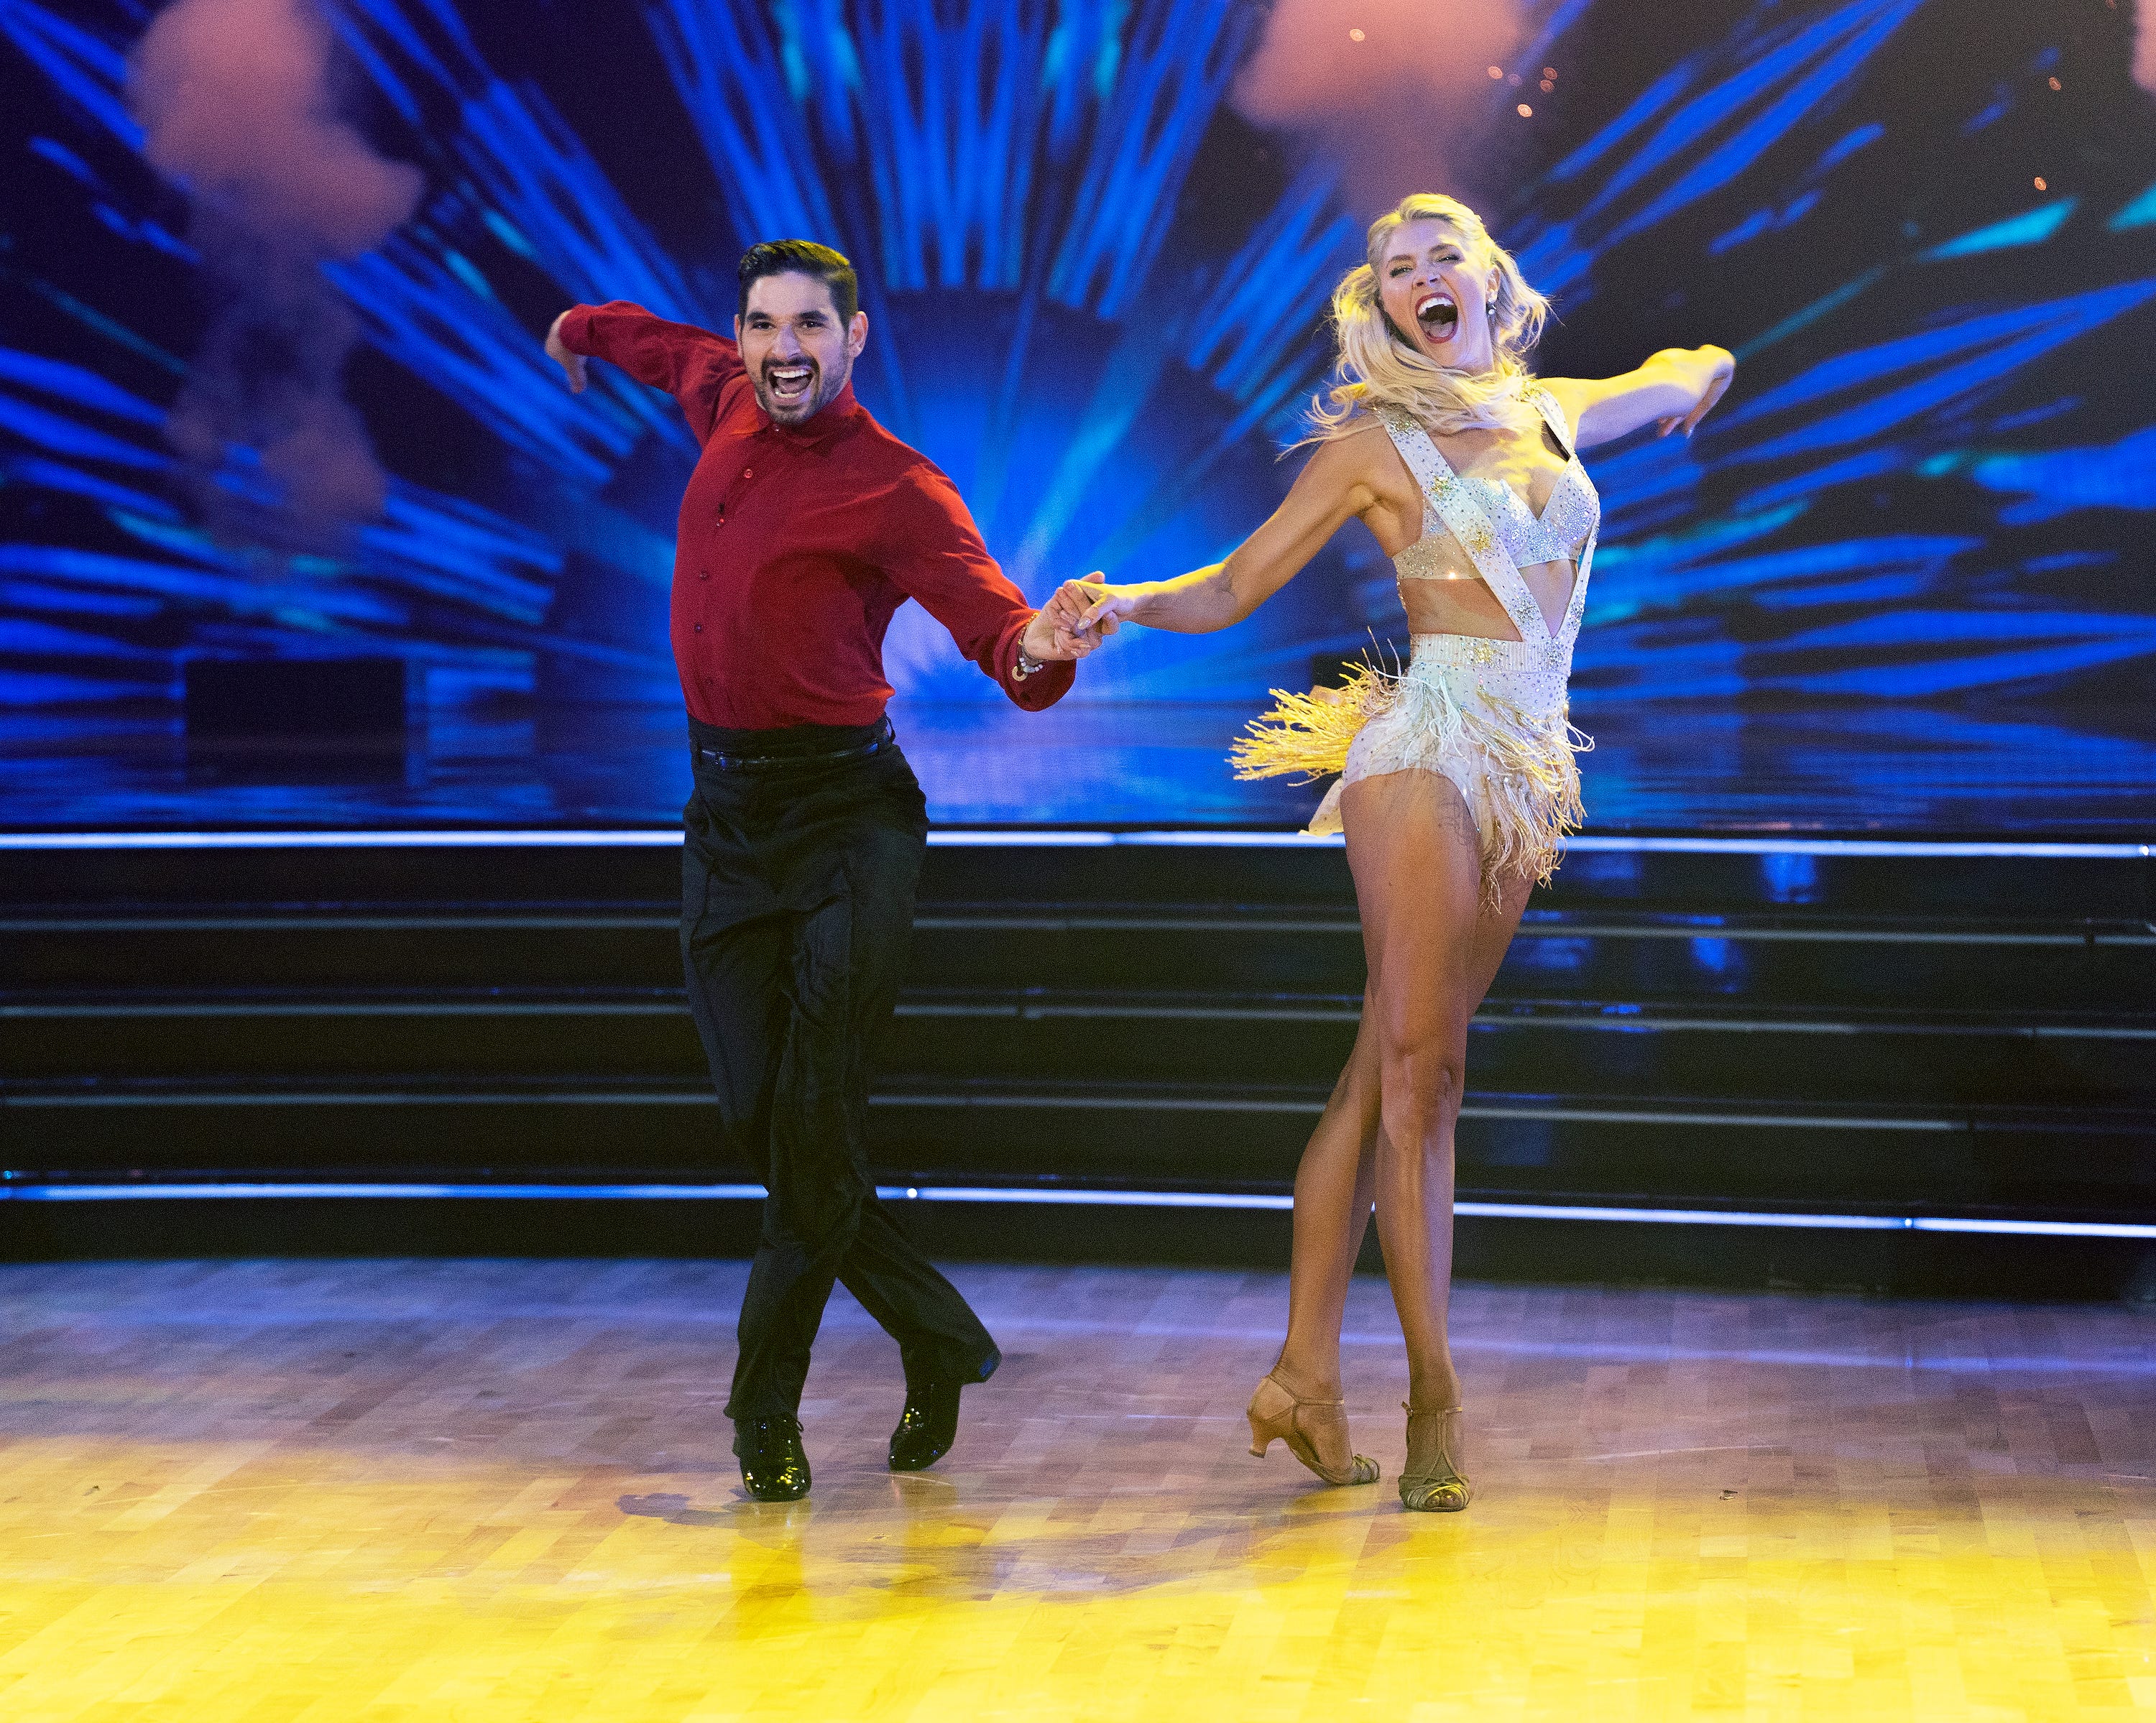 Amanda Kloots Dishes On Dancing With The Stars Experience